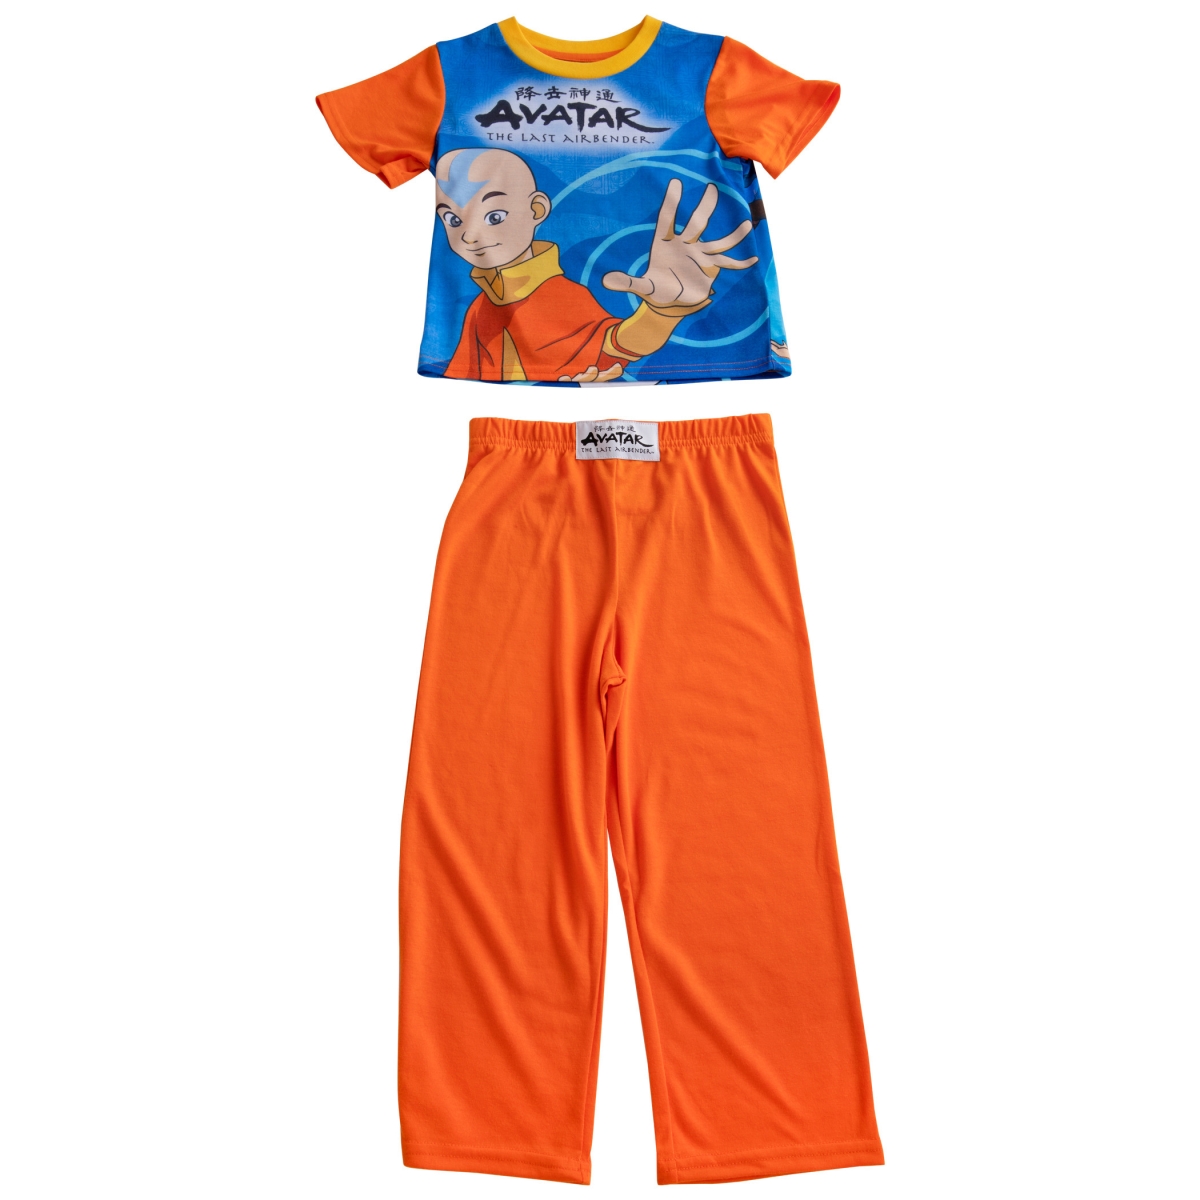 Picture of Avatar the Last Airbender 830415-size8 Avatar the Last Airbender Pajama Shirt & Pant Set - Size 8